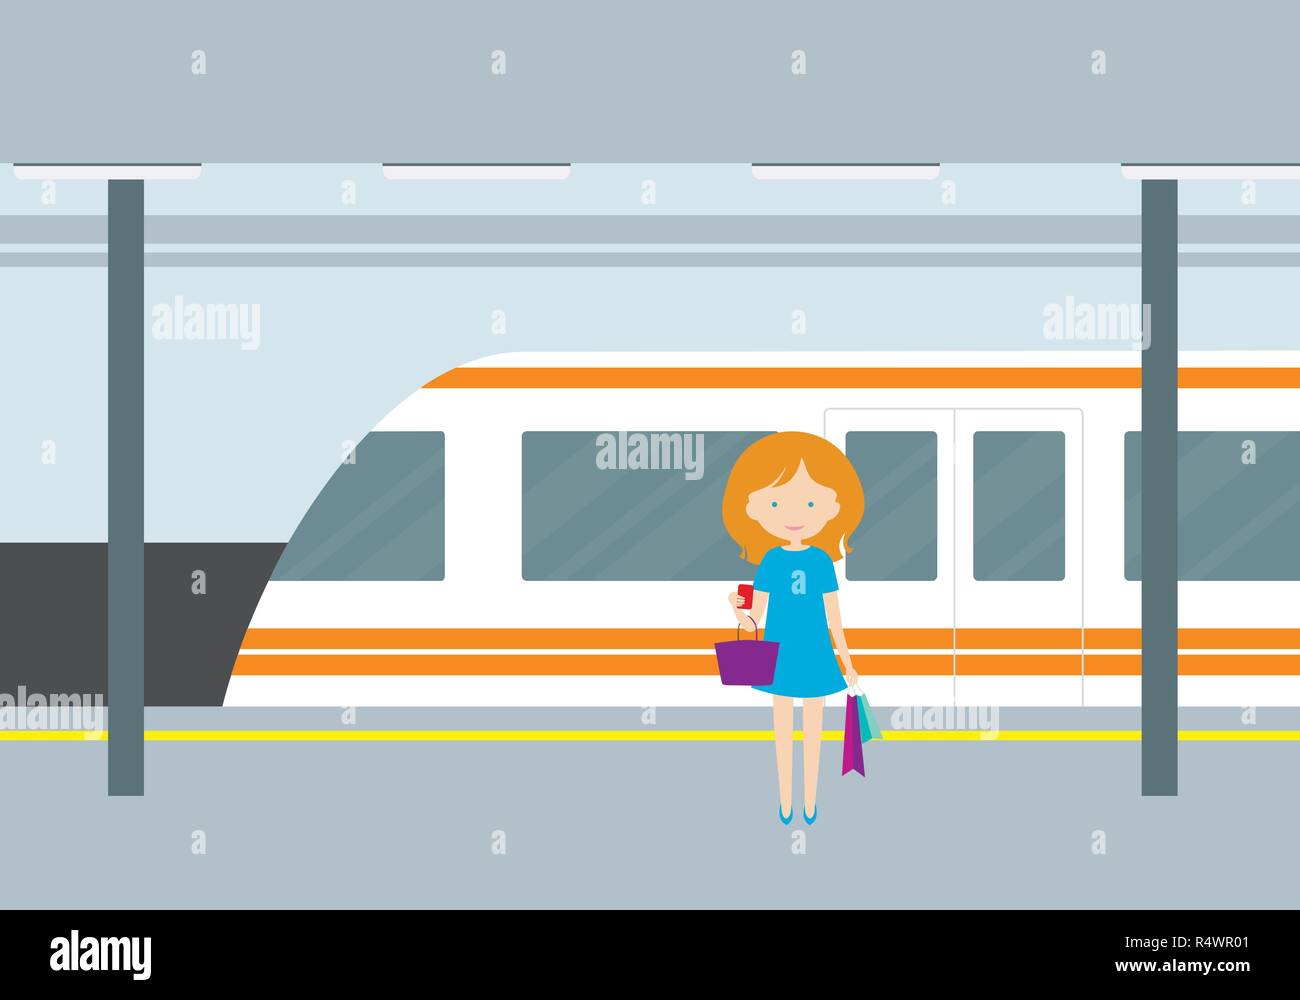 Flat design illustration of a subway station with a train, lights and passenger woman with a ticket and bags in hand - vector Stock Vector